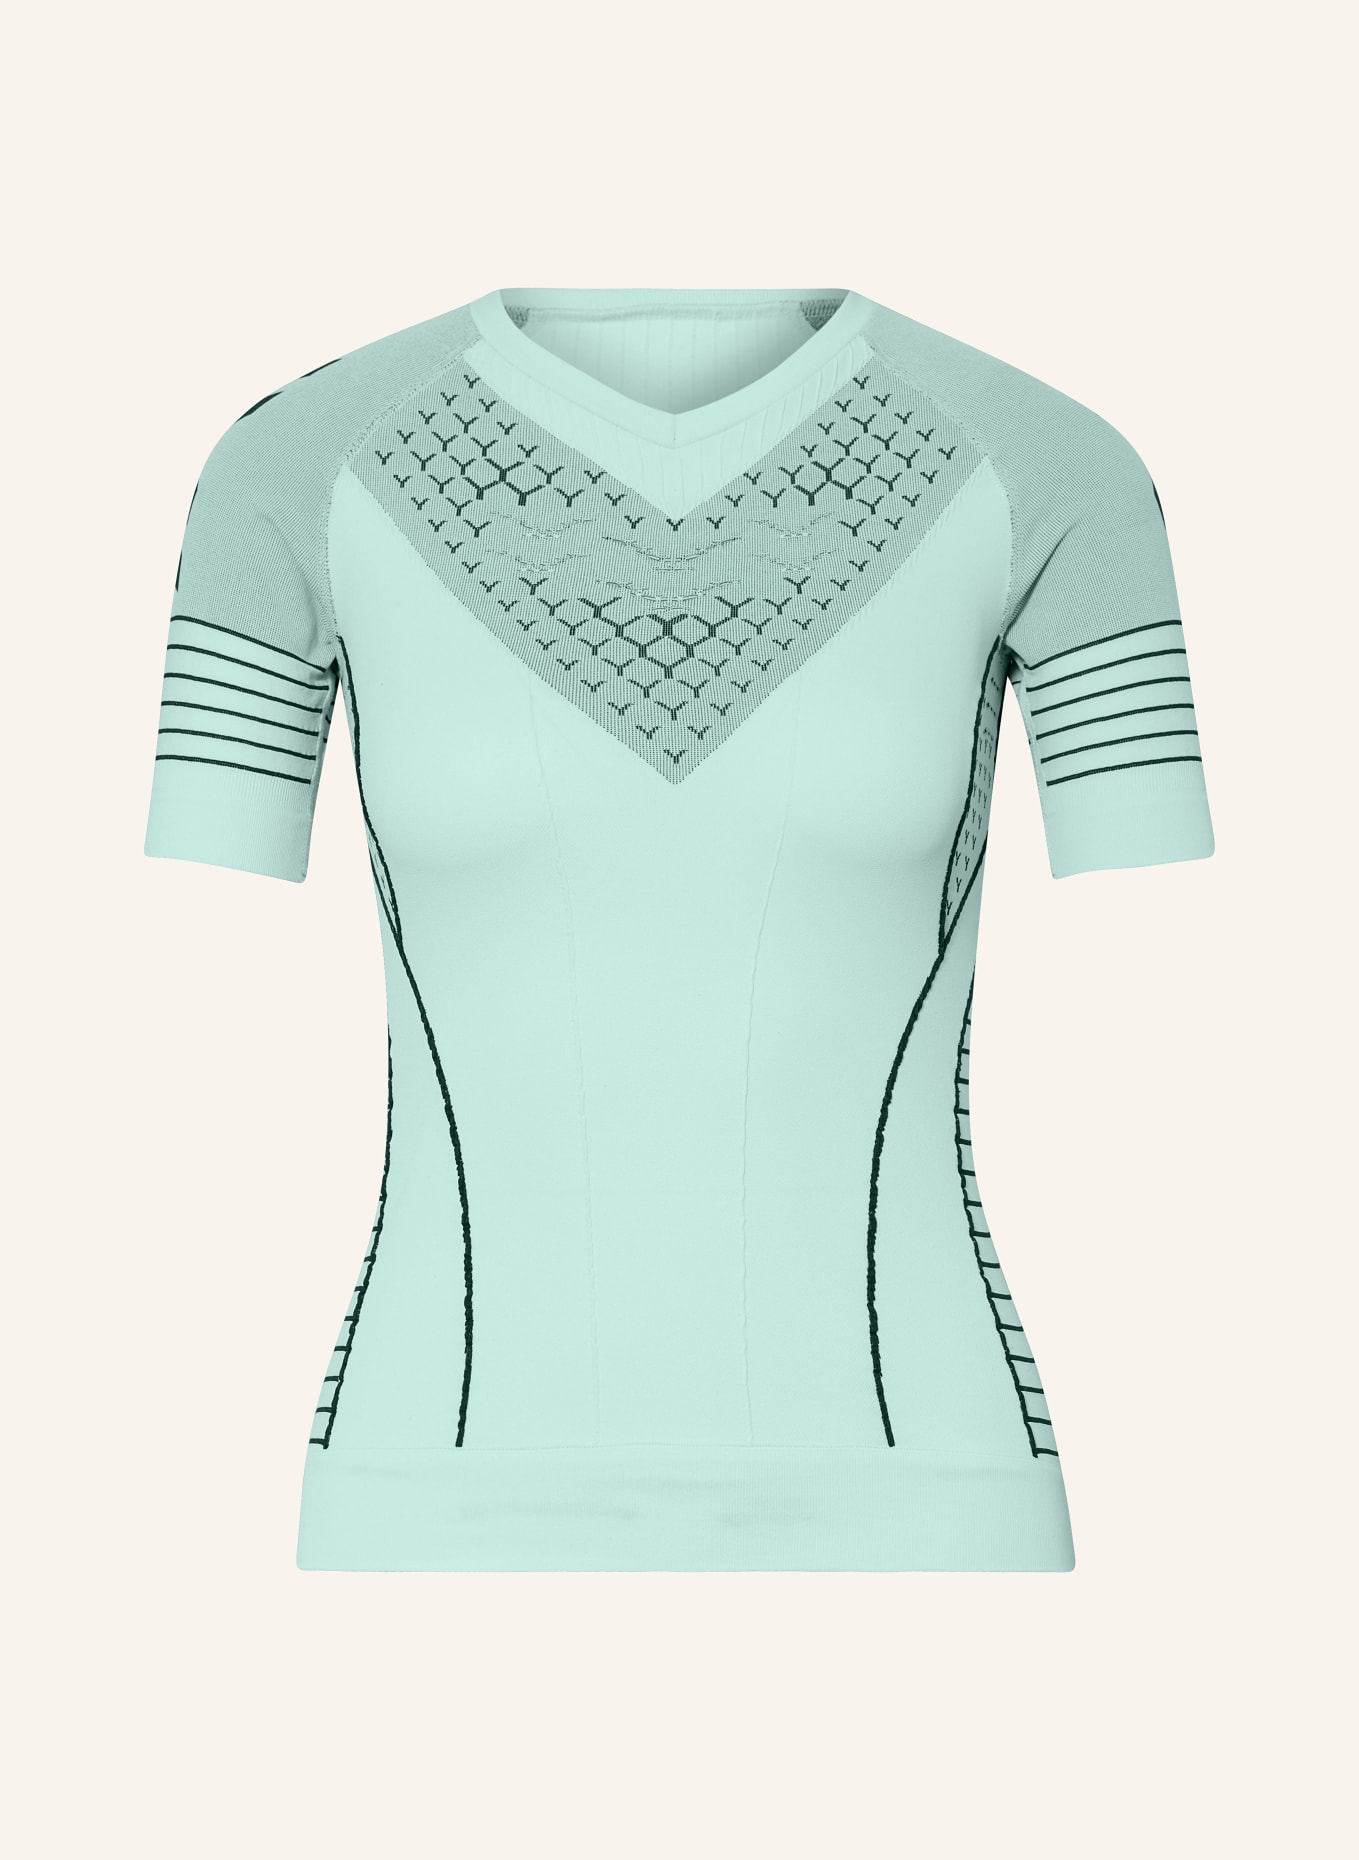 X-BIONIC Functional underwear shirt TWYCE RACE, Color: TURQUOISE/ BLACK (Image 1)